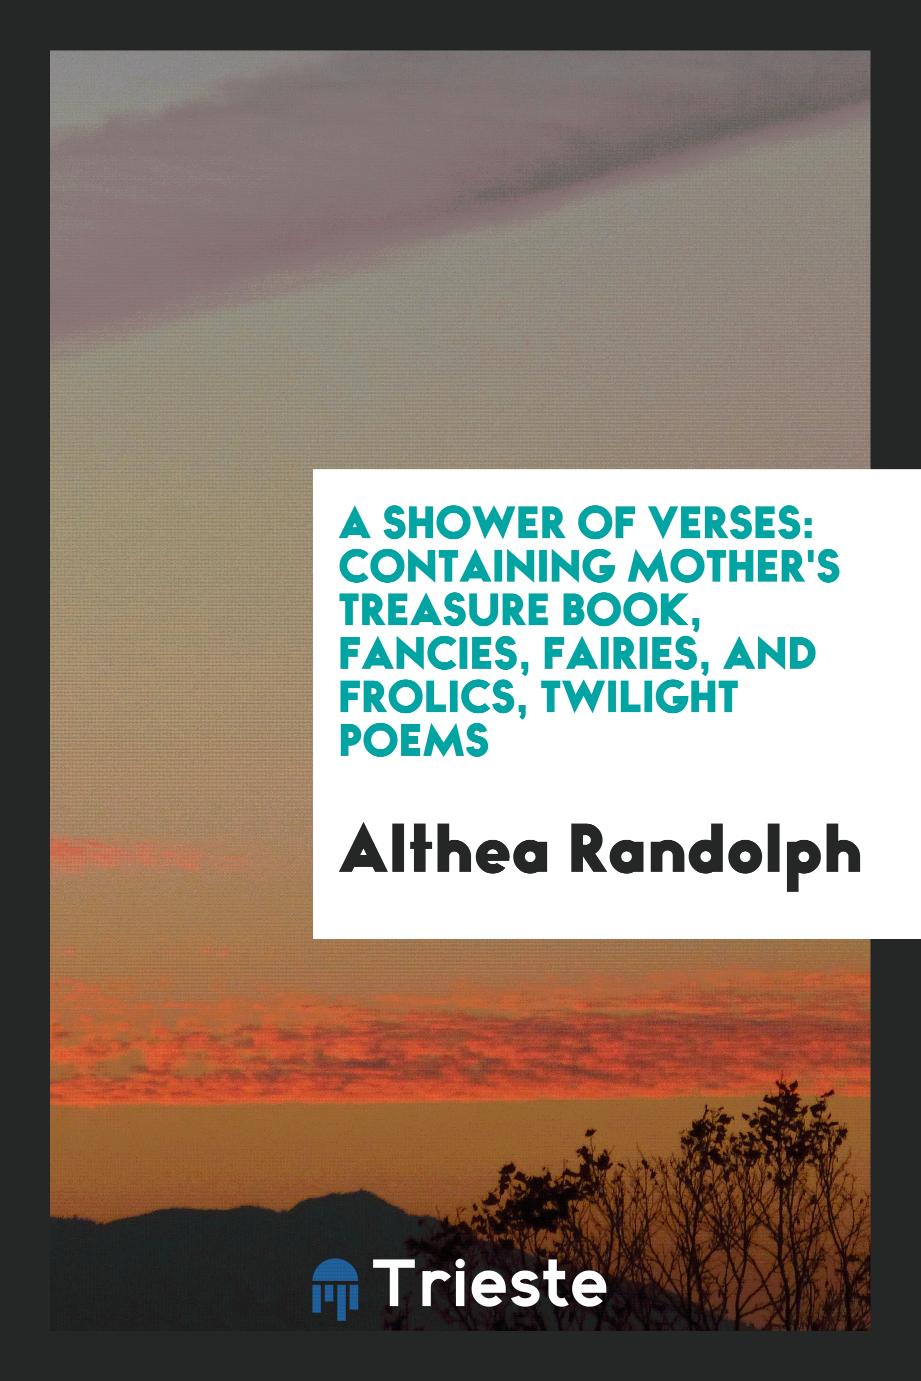 A Shower of Verses: Containing Mother's Treasure Book, Fancies, Fairies, and Frolics, Twilight Poems